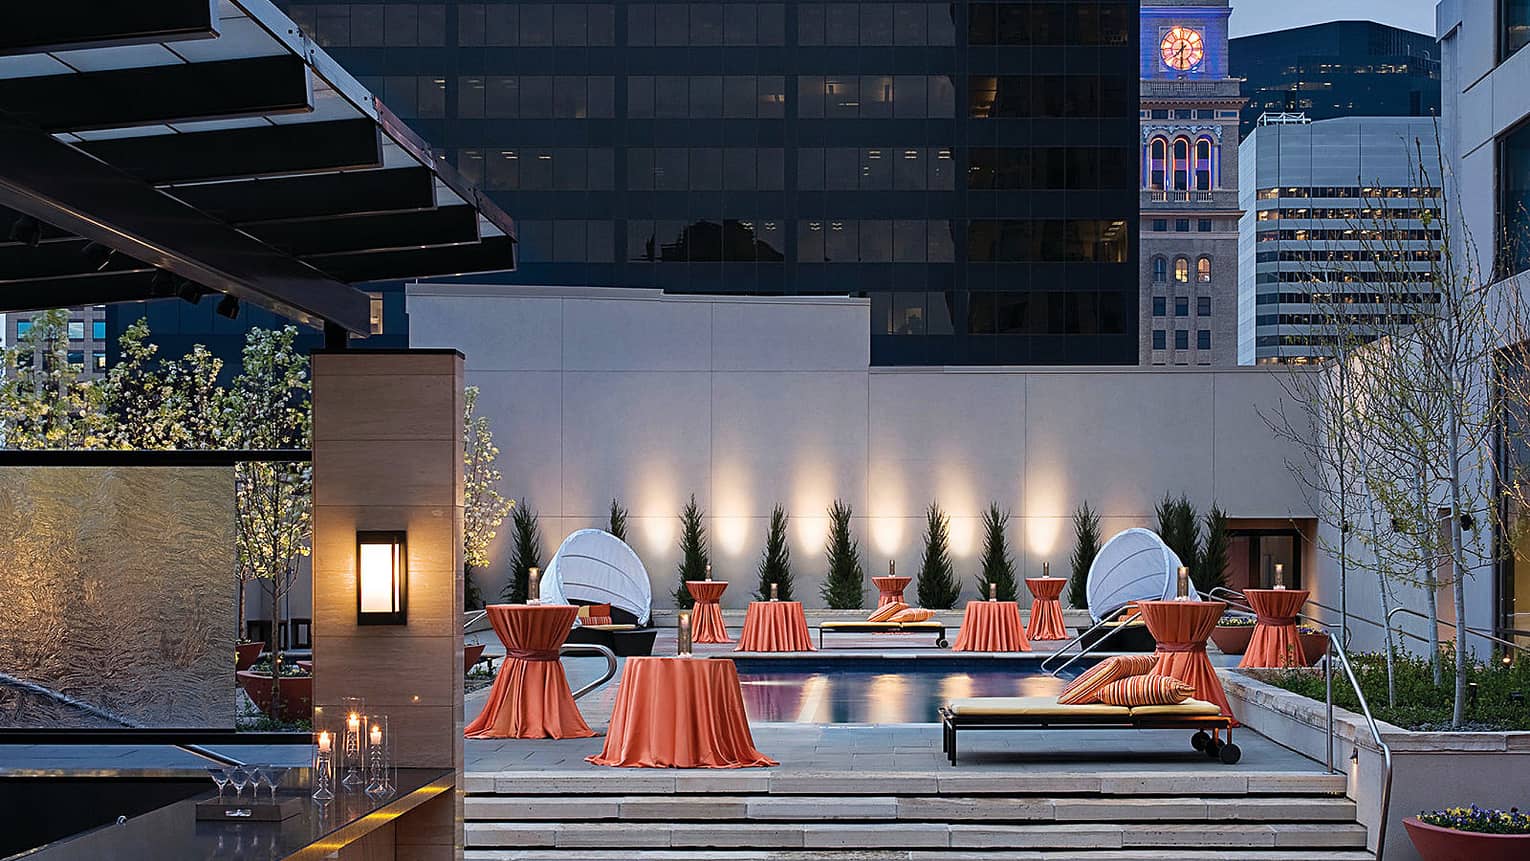 Rooftop bar, orange linens over small tables around outdoor pool